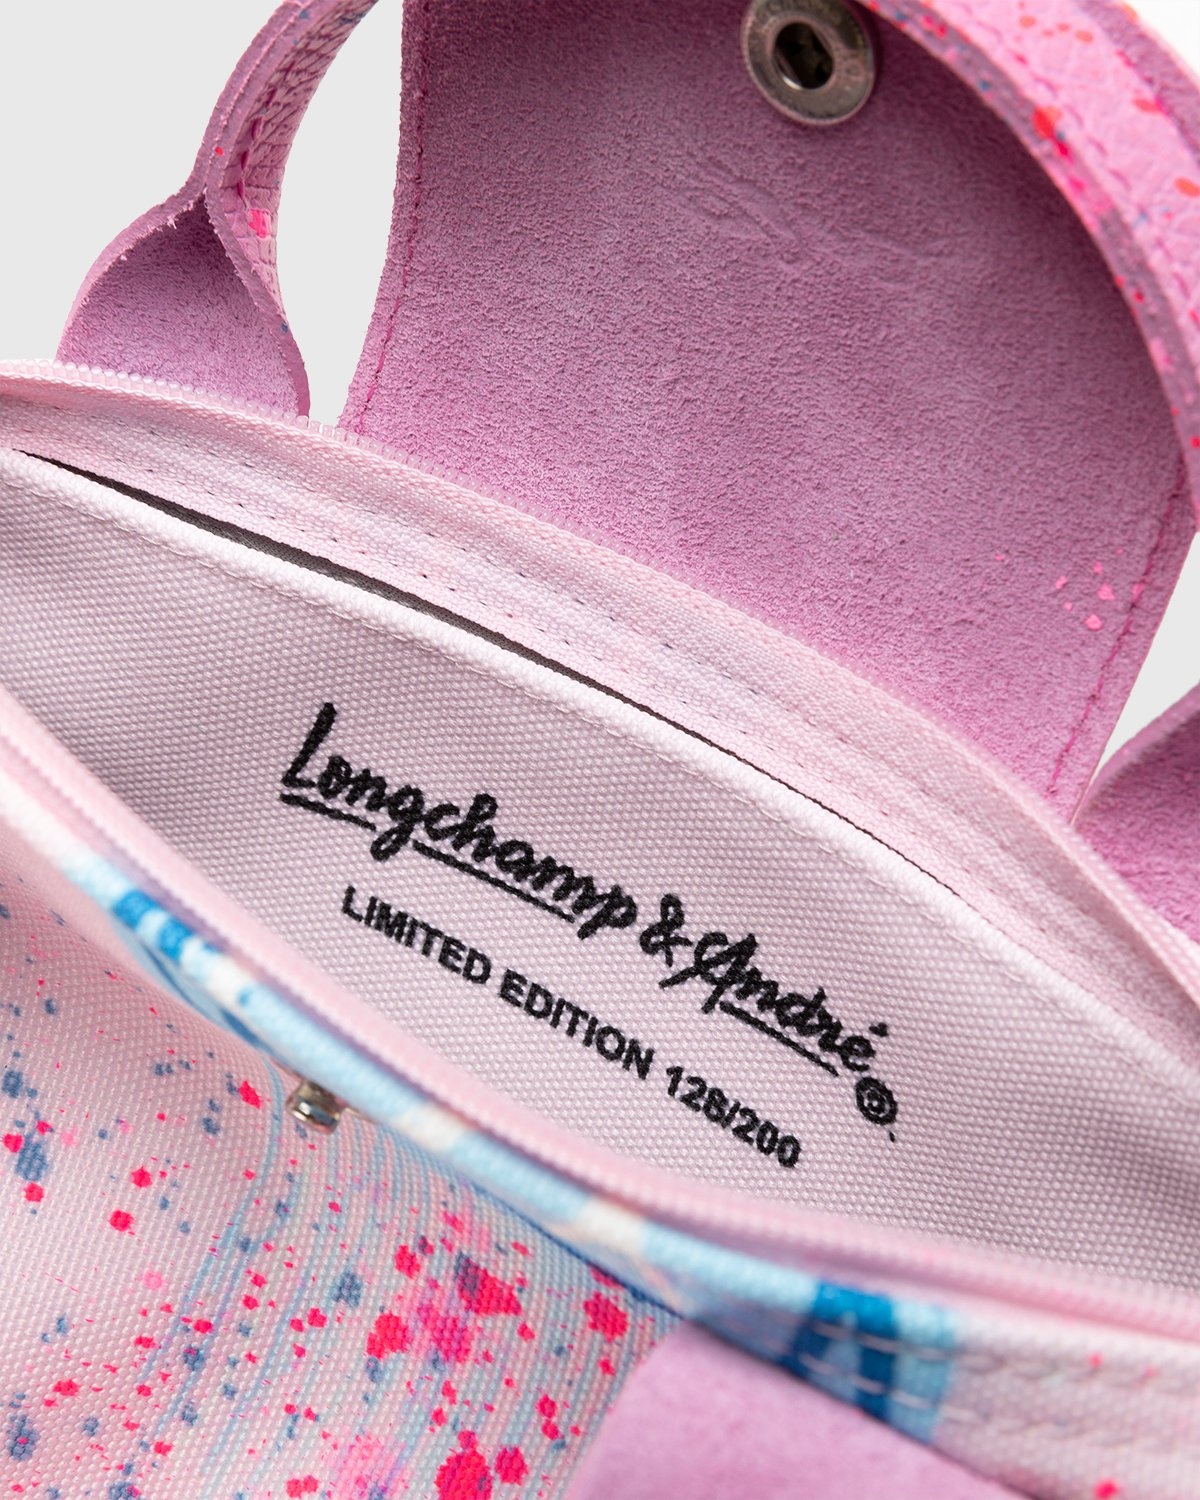 Longchamp And Graffiti Artist André Collaborate On A Joyous And